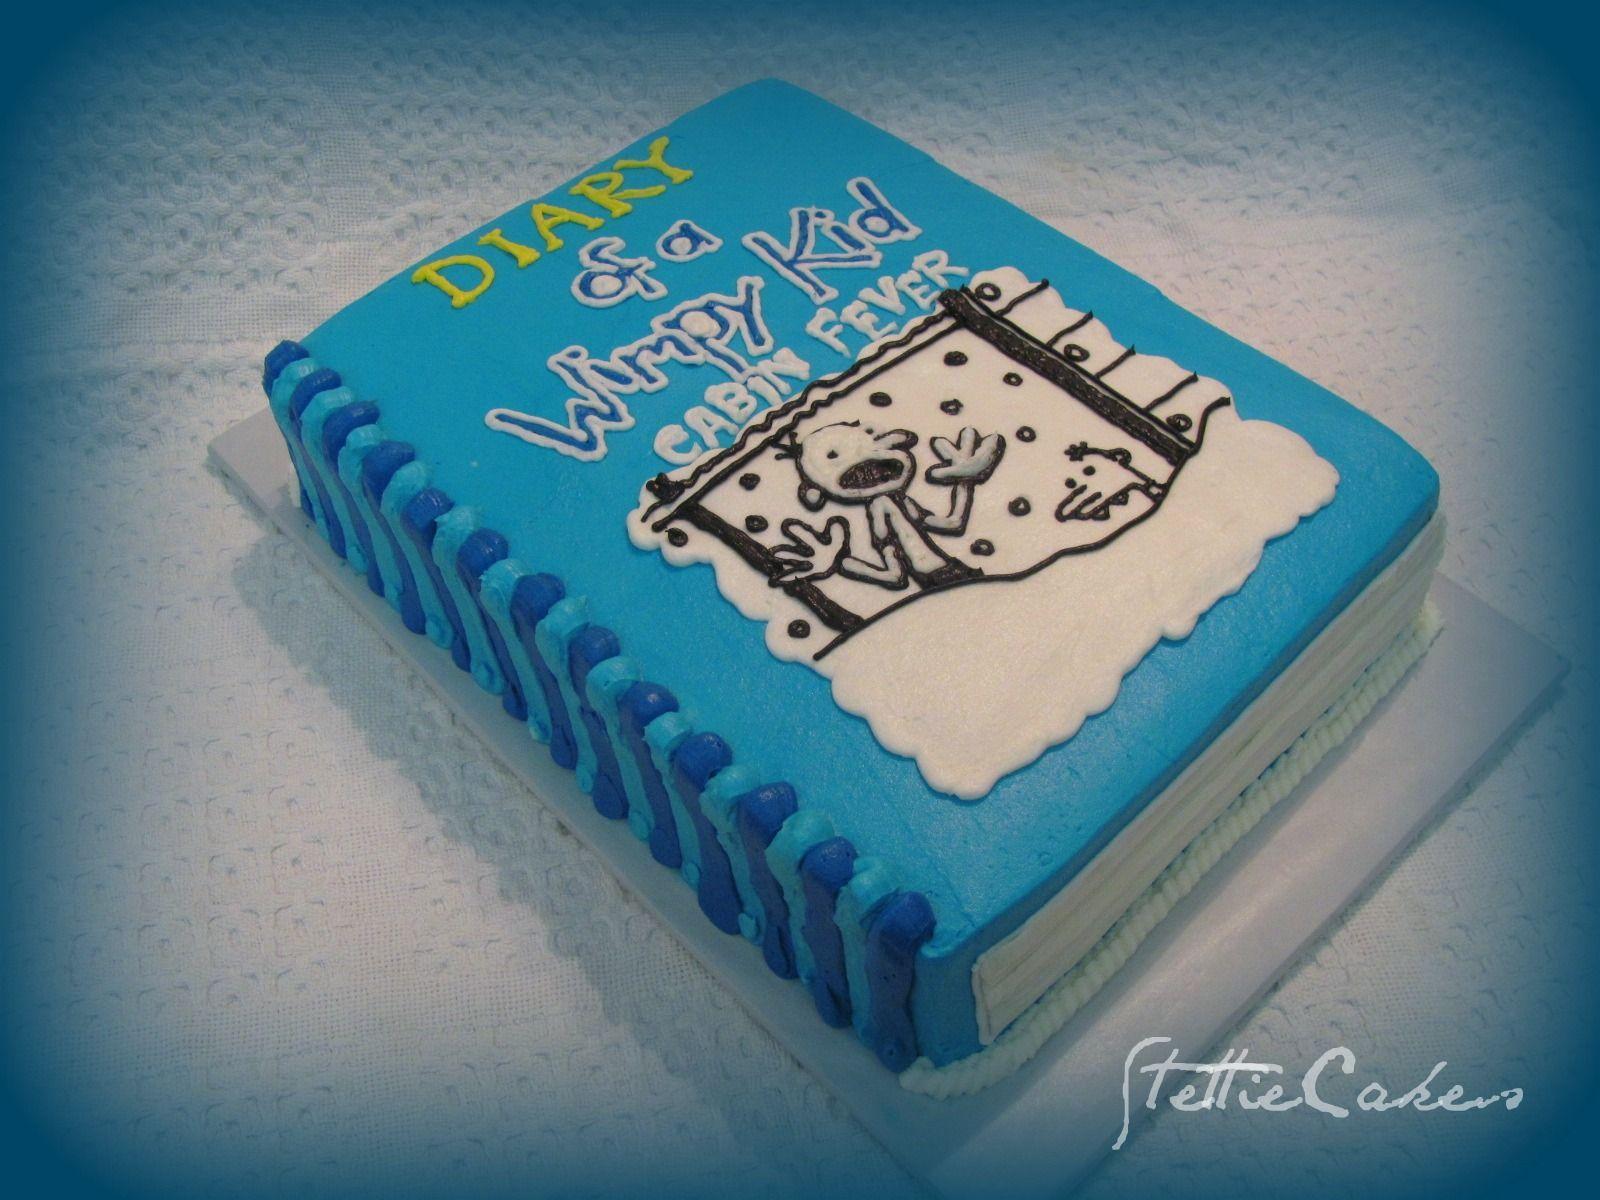 Stettie Cakes: Diary of a Wimpy Kid